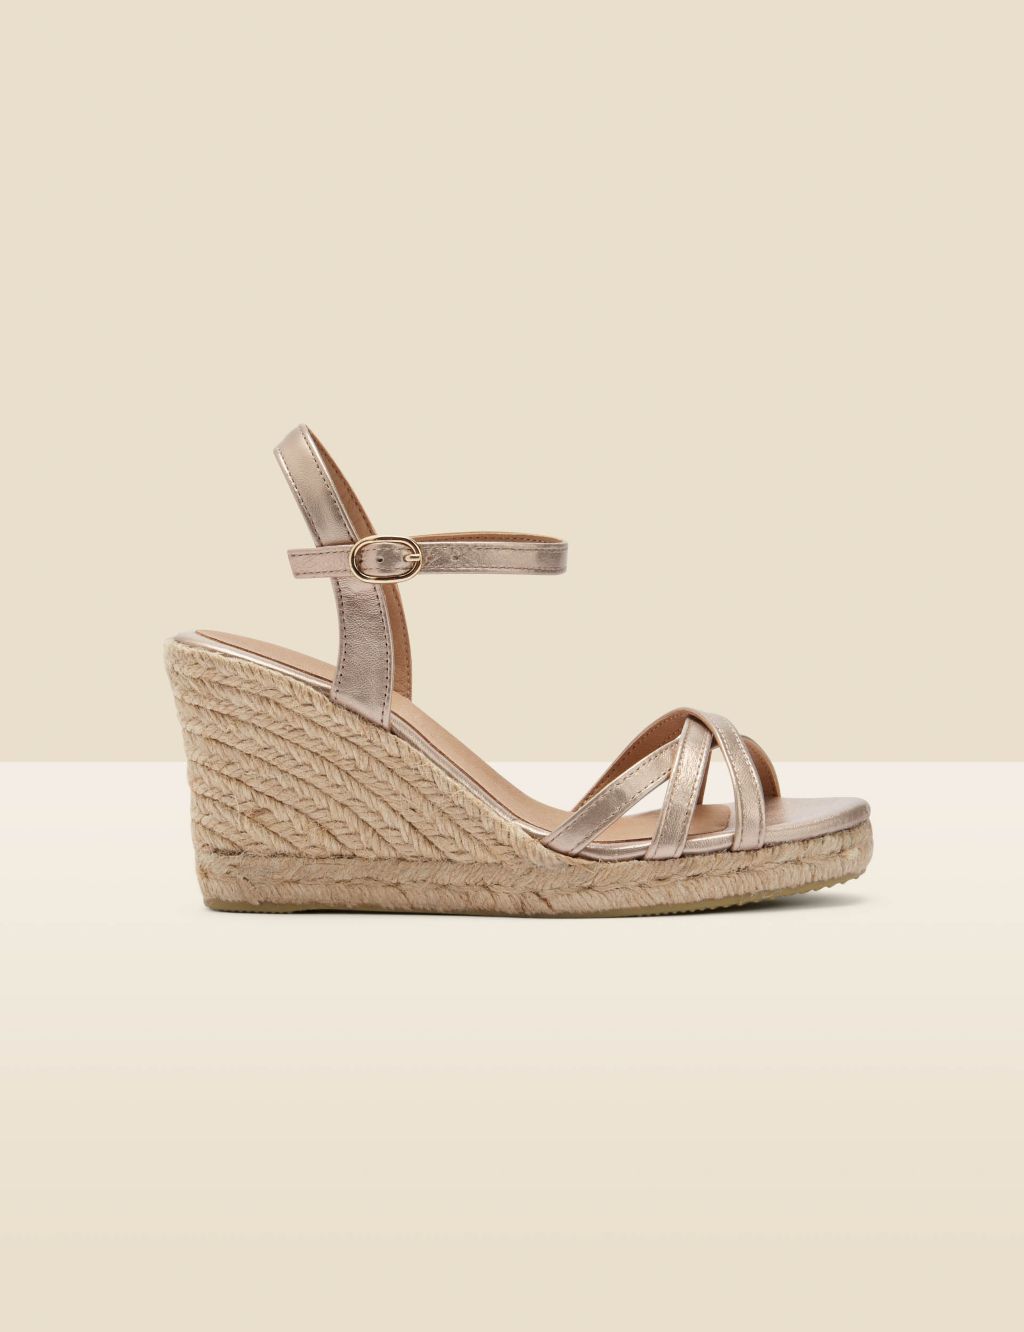 Leather Ankle Strap Wedge Espadrilles image 2